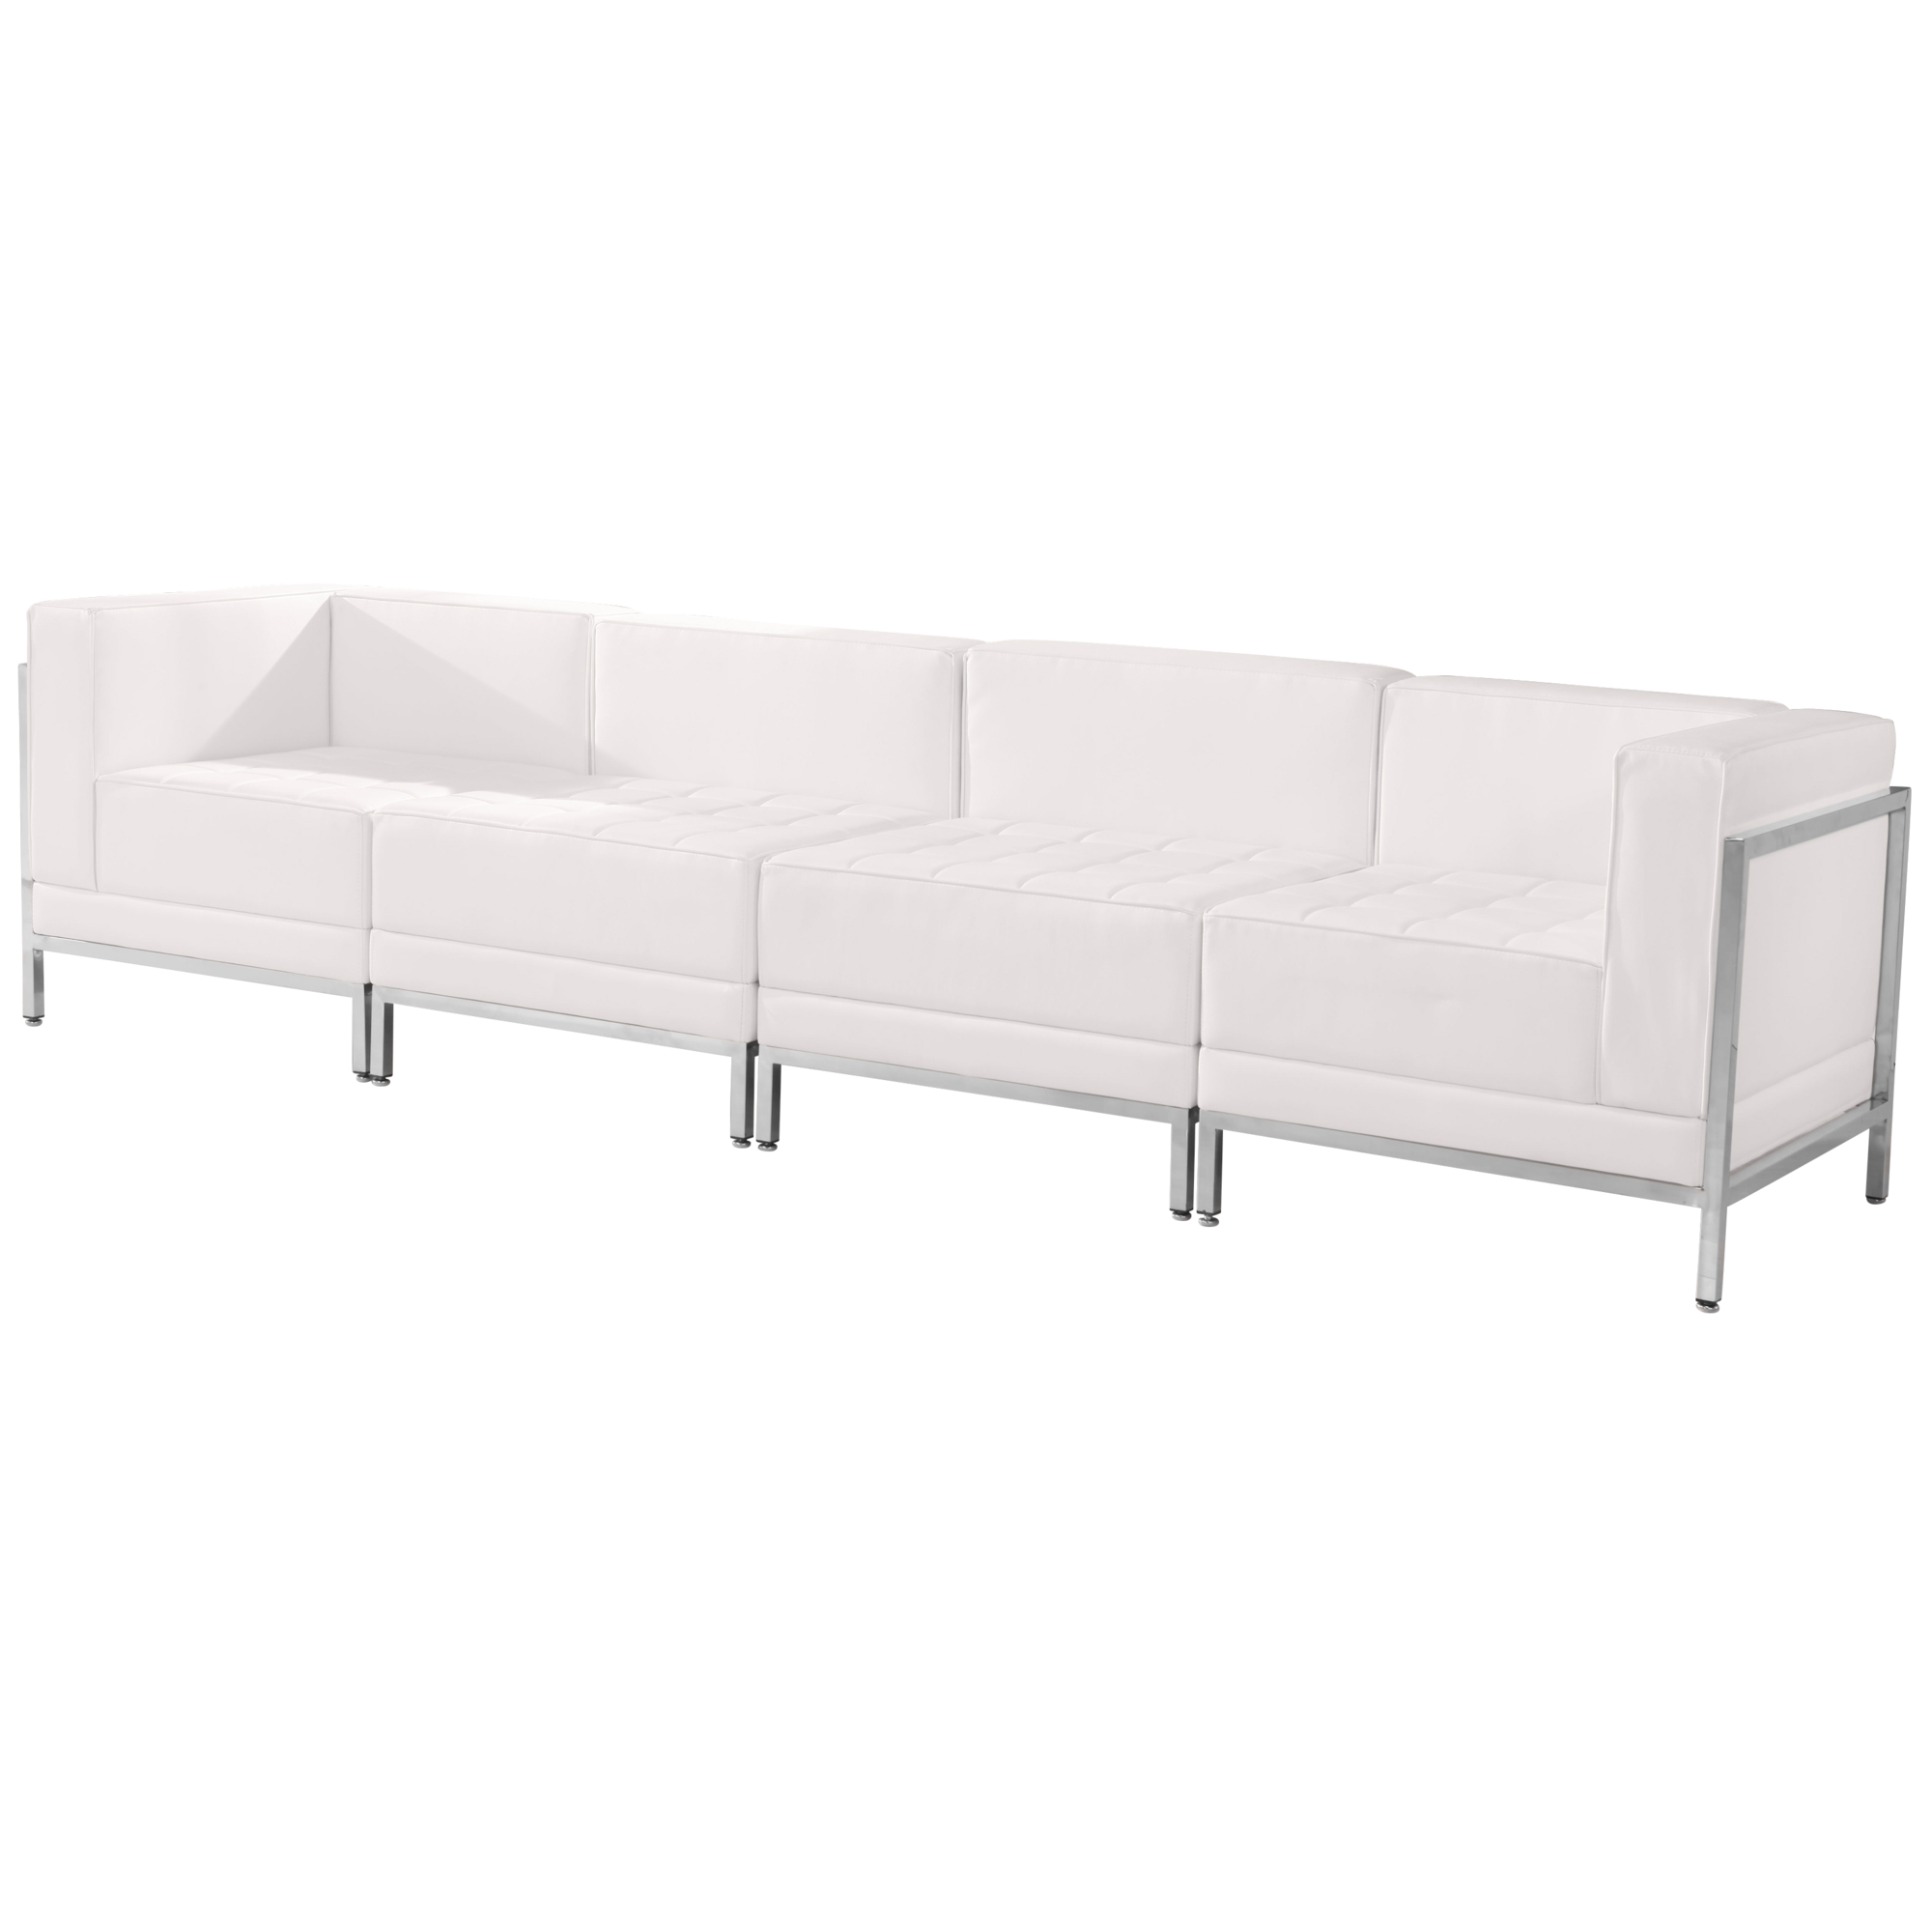 Flash Furniture, White LeatherSoft 4 Piece Modular Lounge Set, Primary Color White, Included (qty.) 4, Model ZBIMAGSET8WH